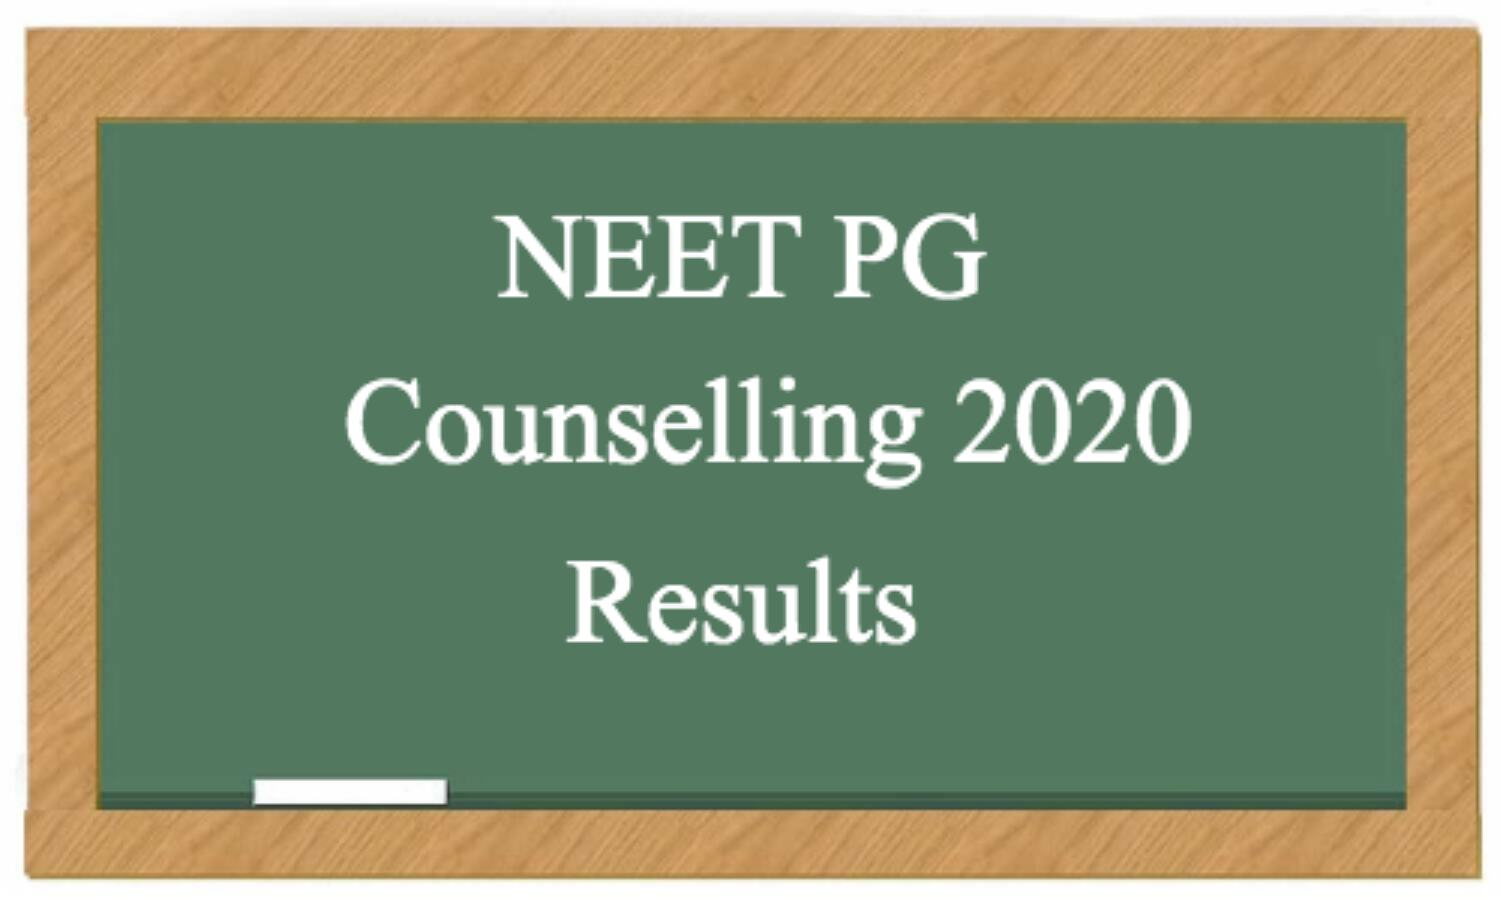 NEET PG Counseling: NEET PG counseling may start from September 19